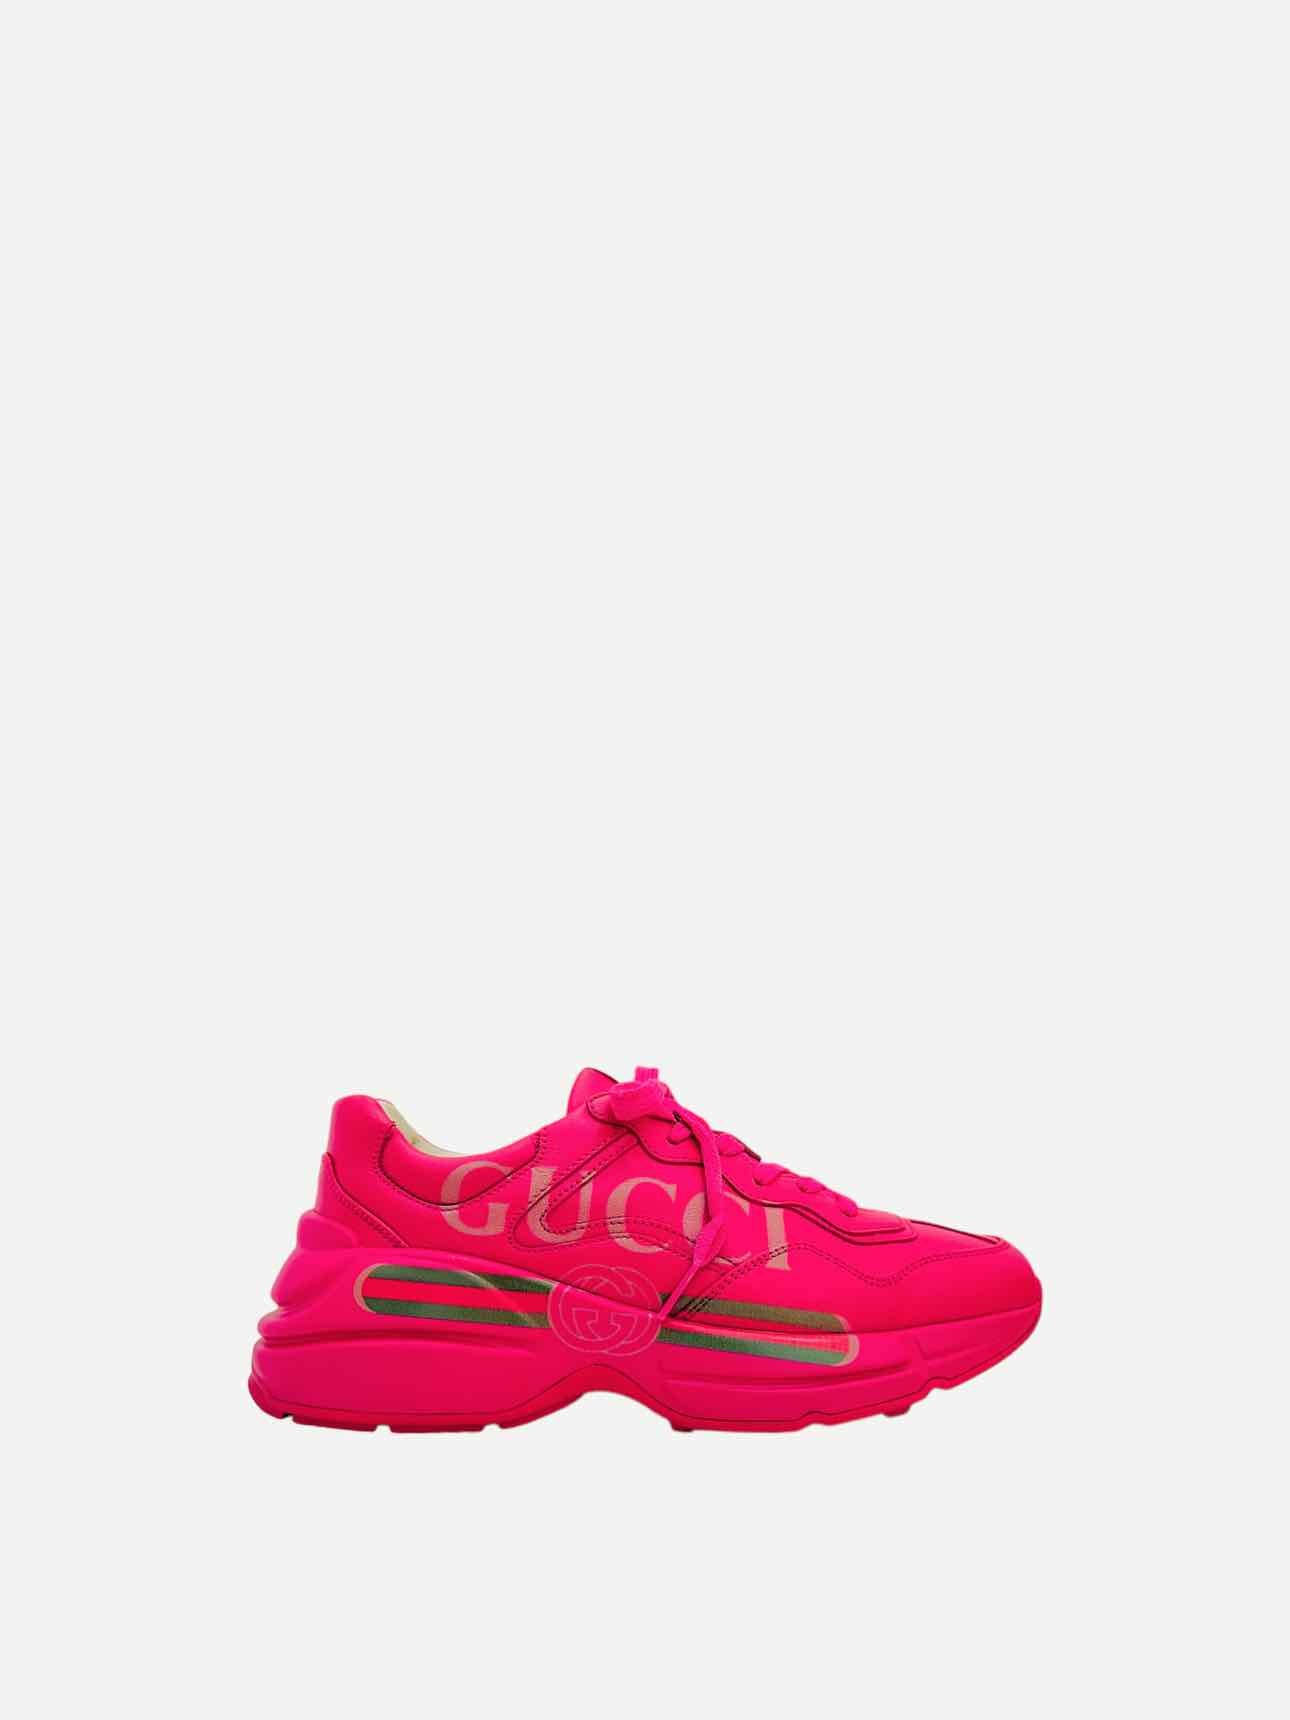 GUCCI Rython Pink Sneakers